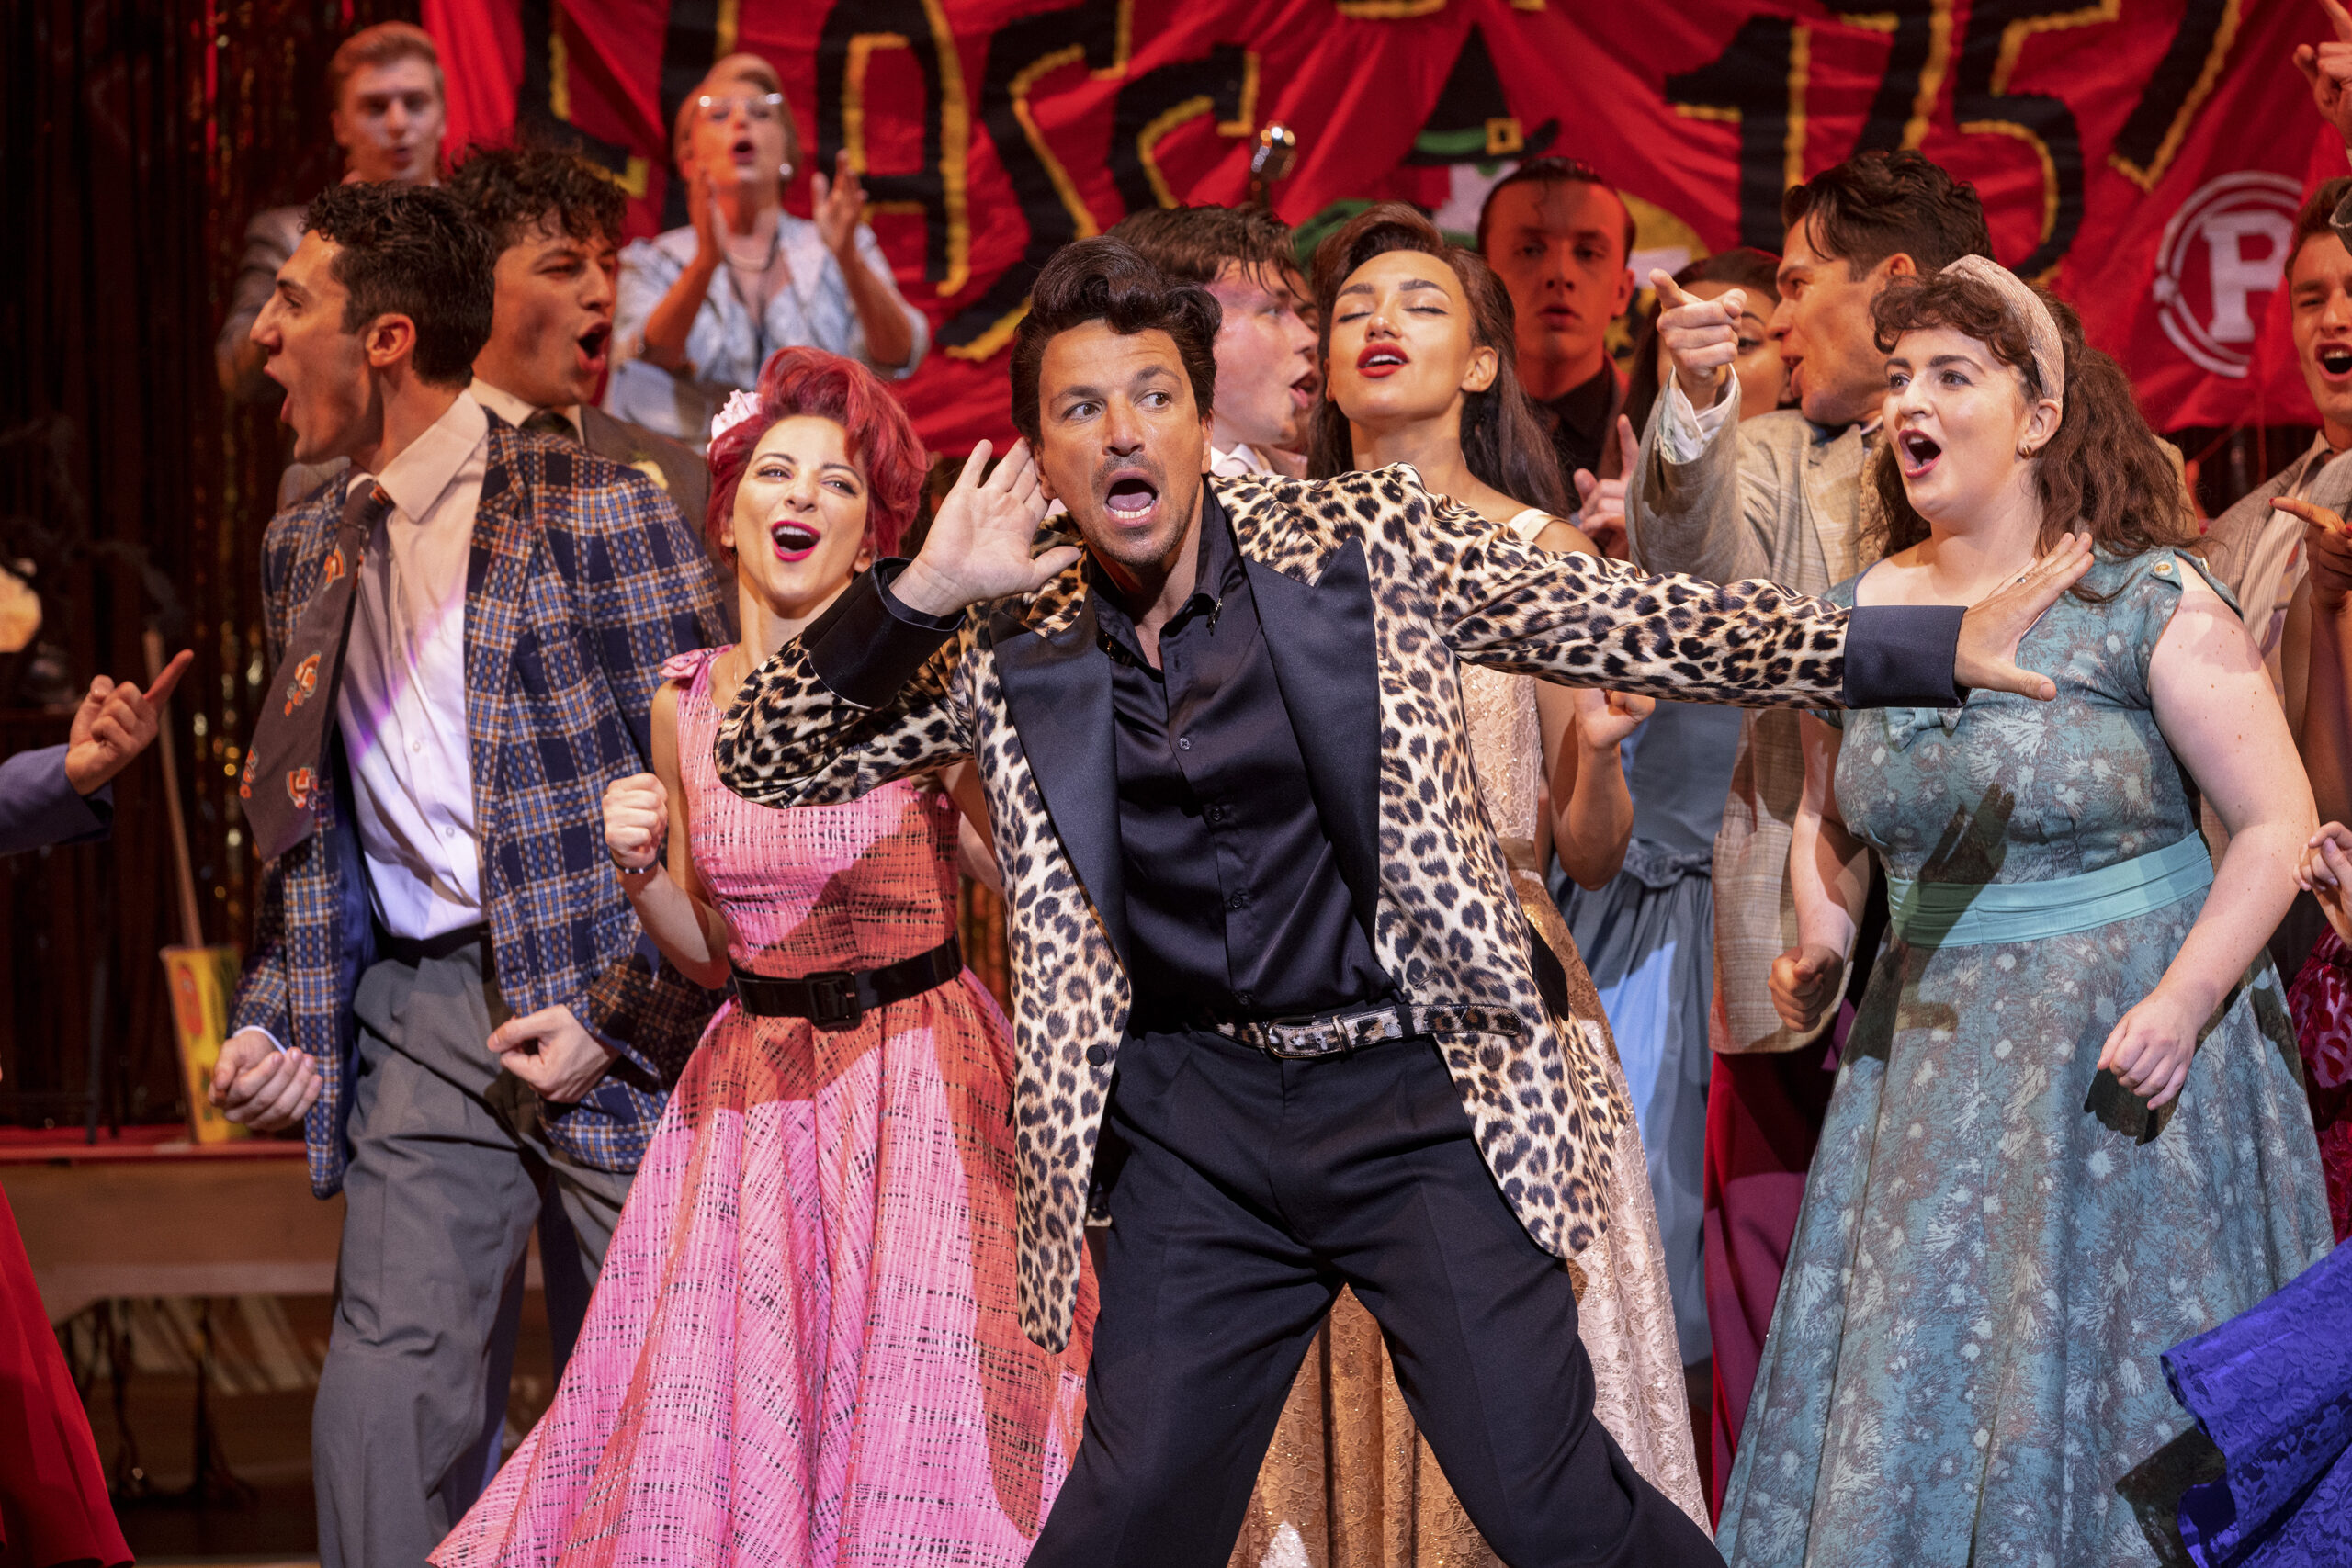 Peter Andre Front Centre As Vince Fontaine In Grease Credit Sean Ebsworth Barnes Scaled 